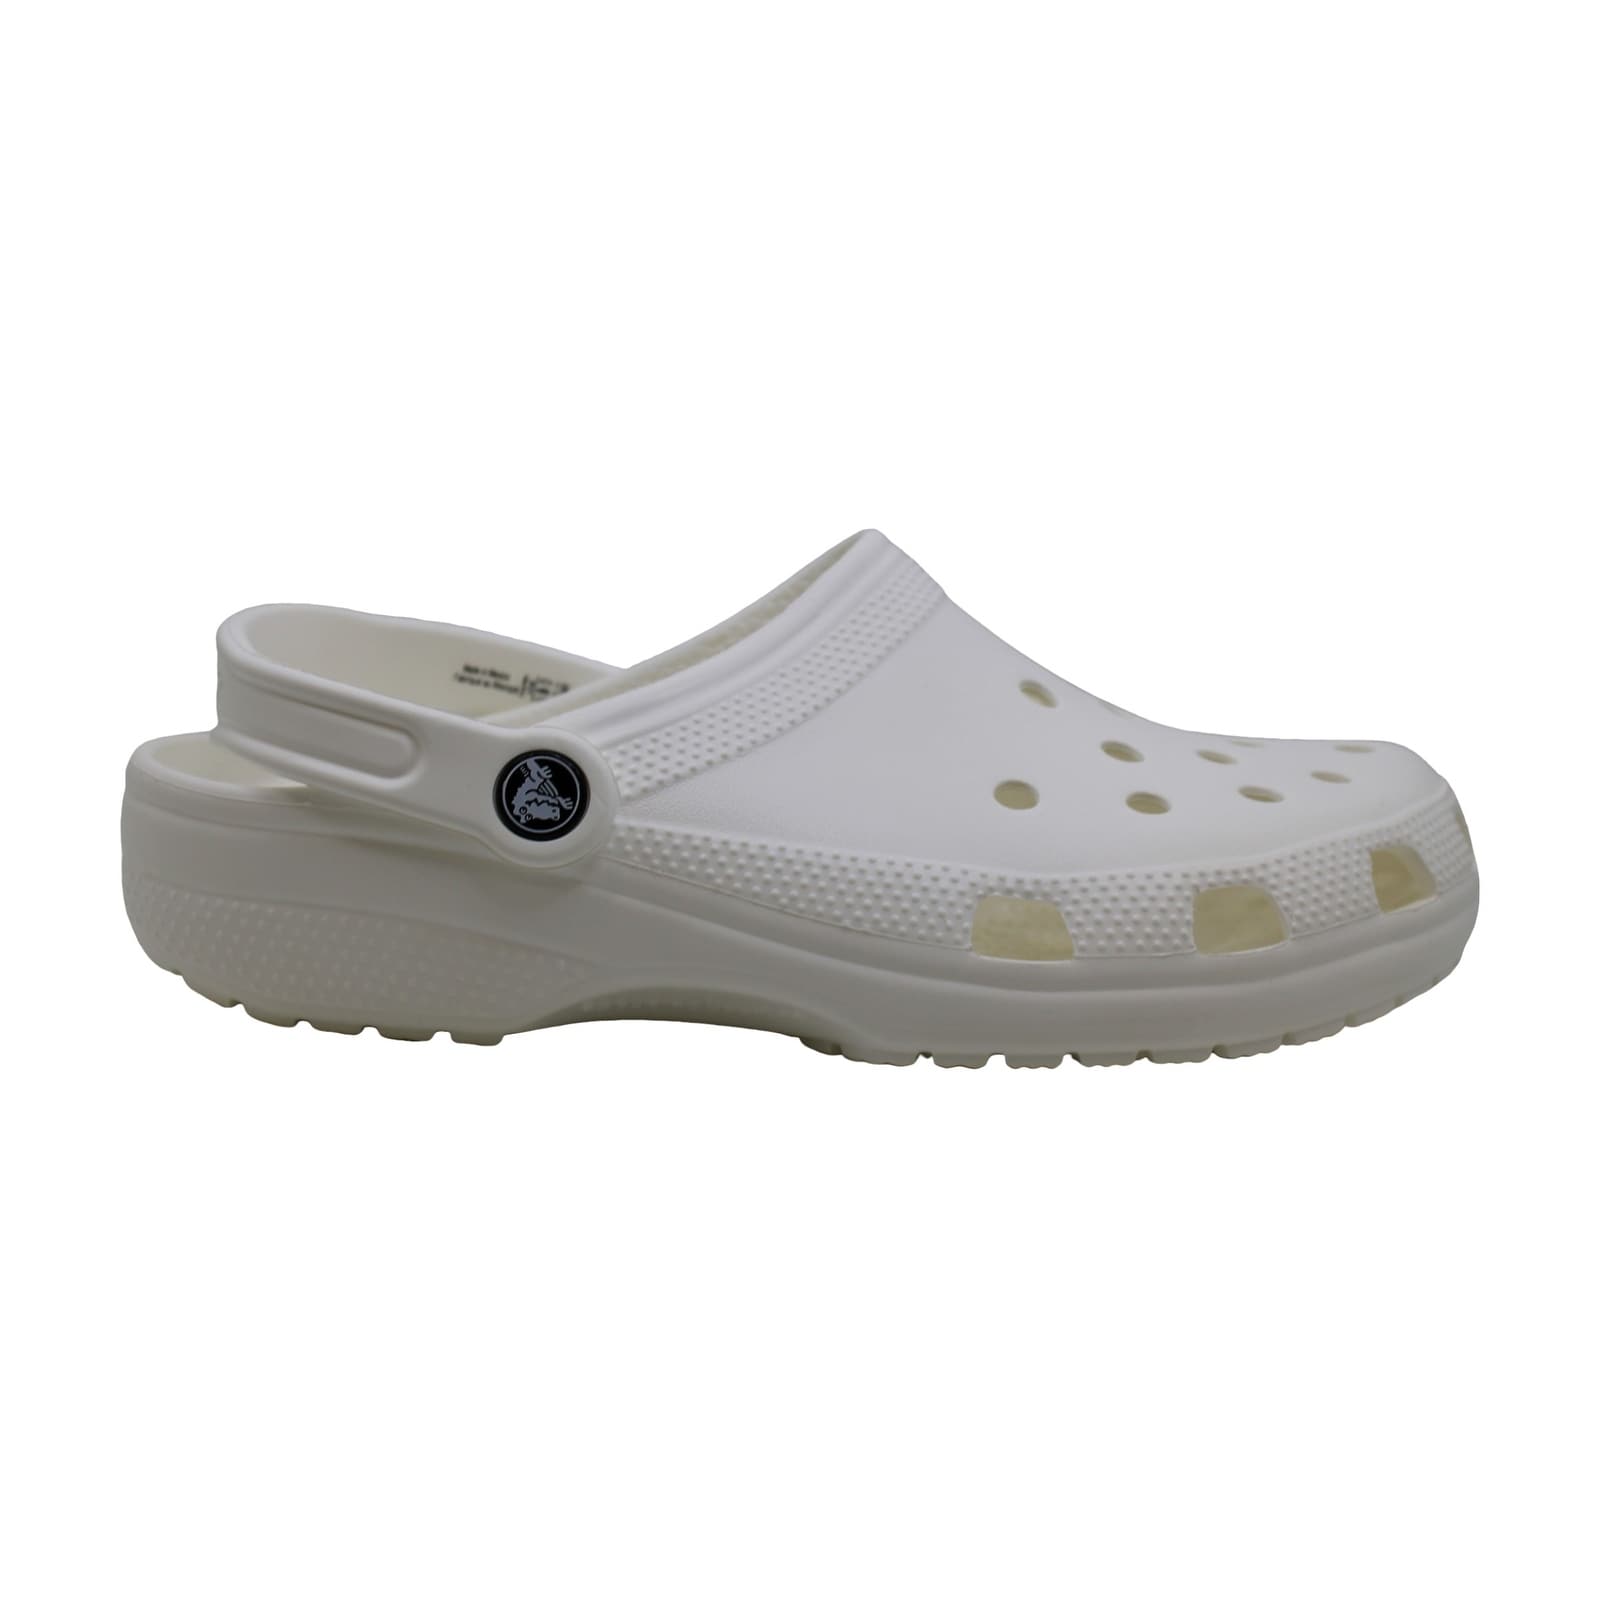 clogs online shopping